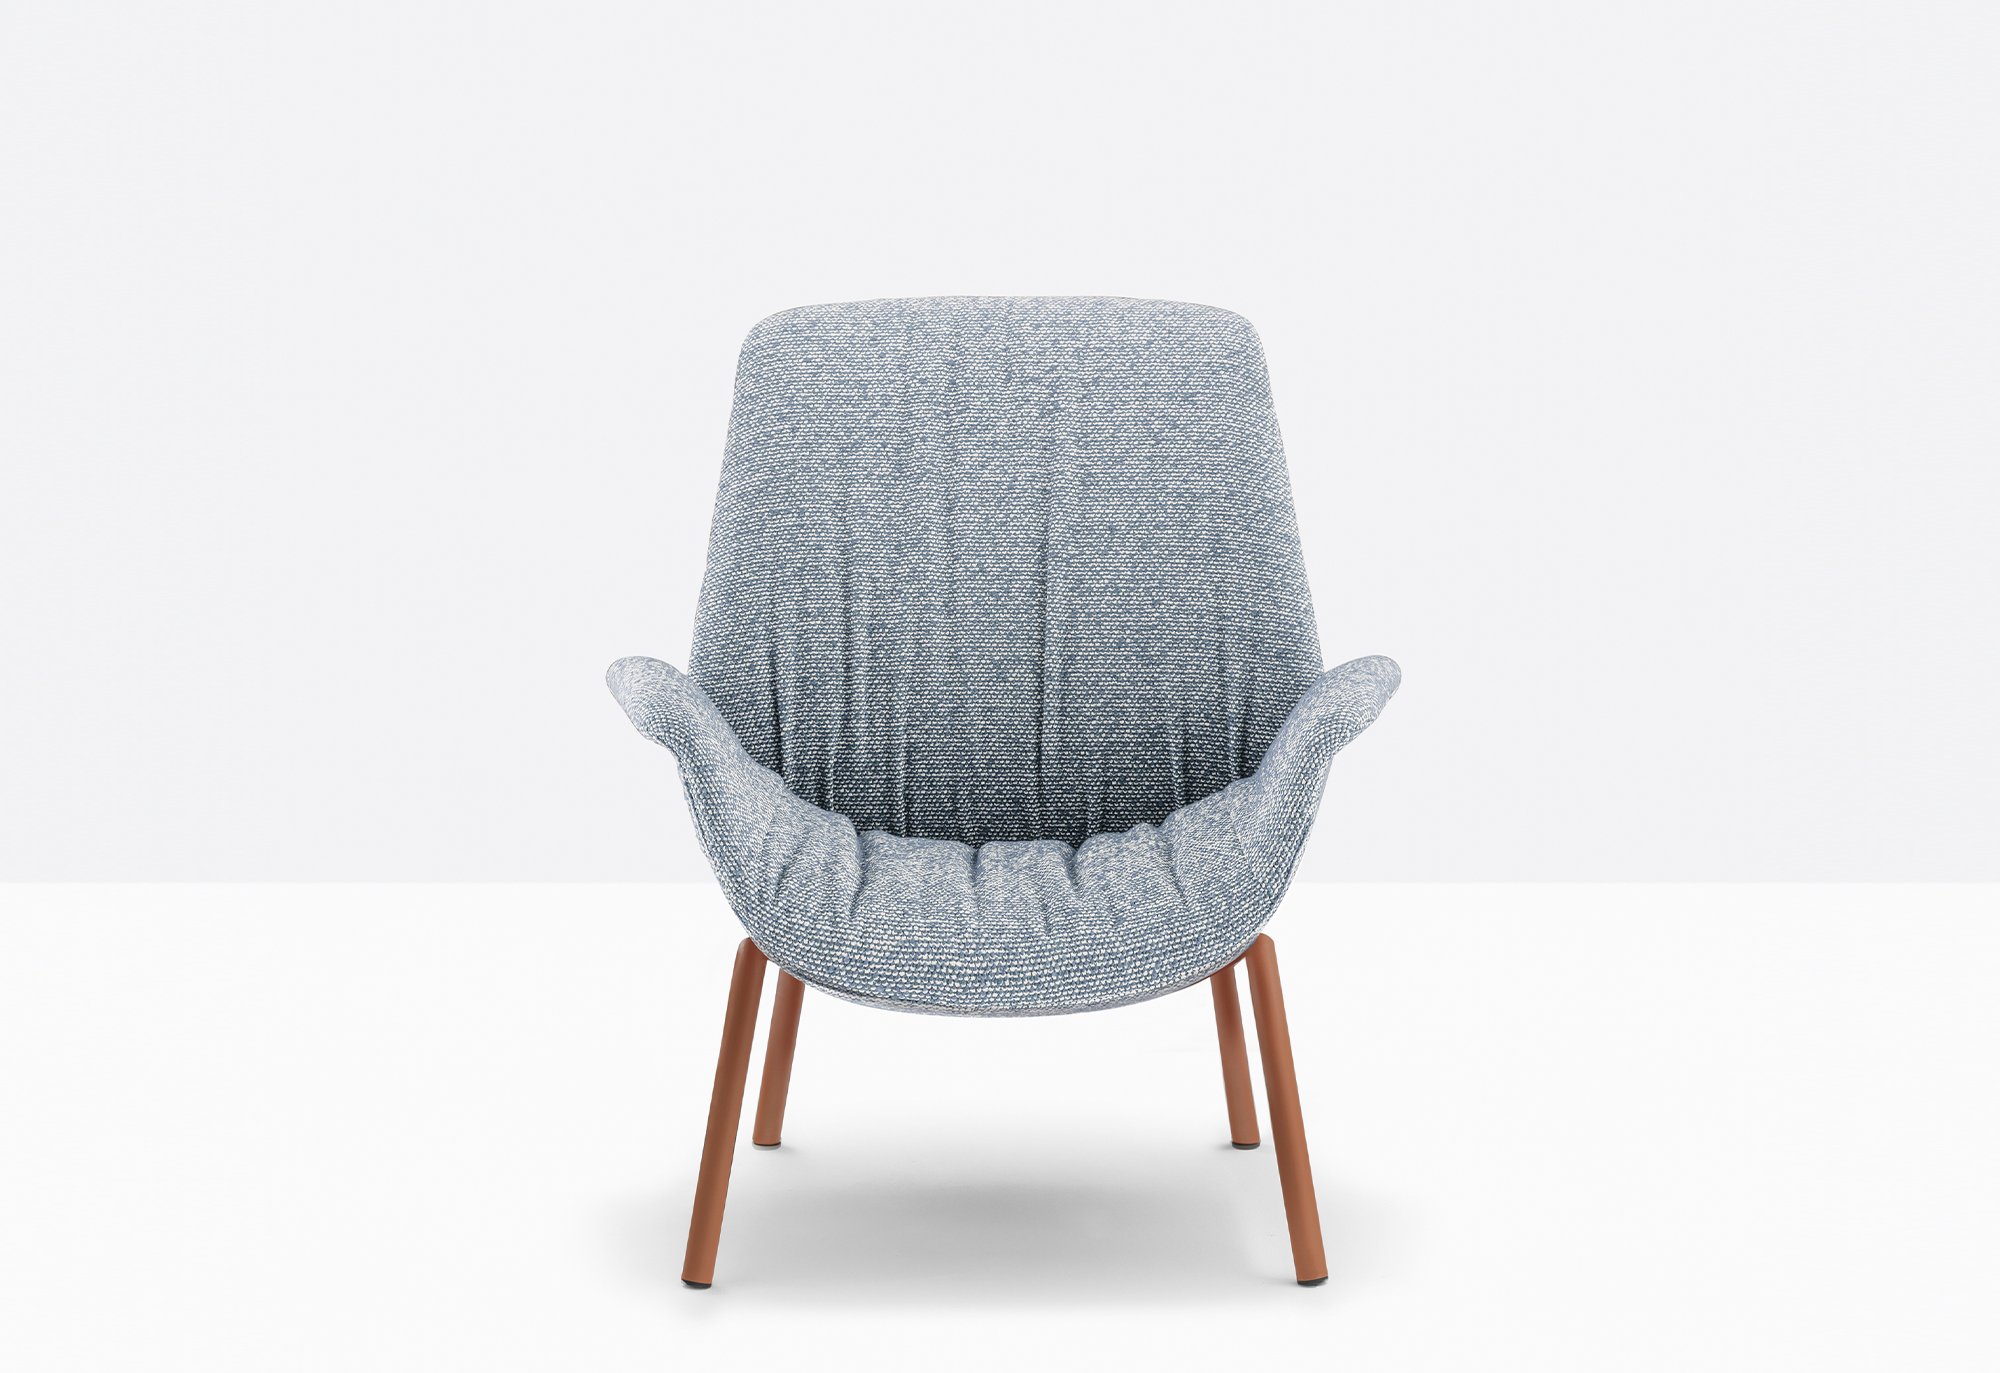 ILA Armchair lounge from Pedrali, designed by Patrick Jouin